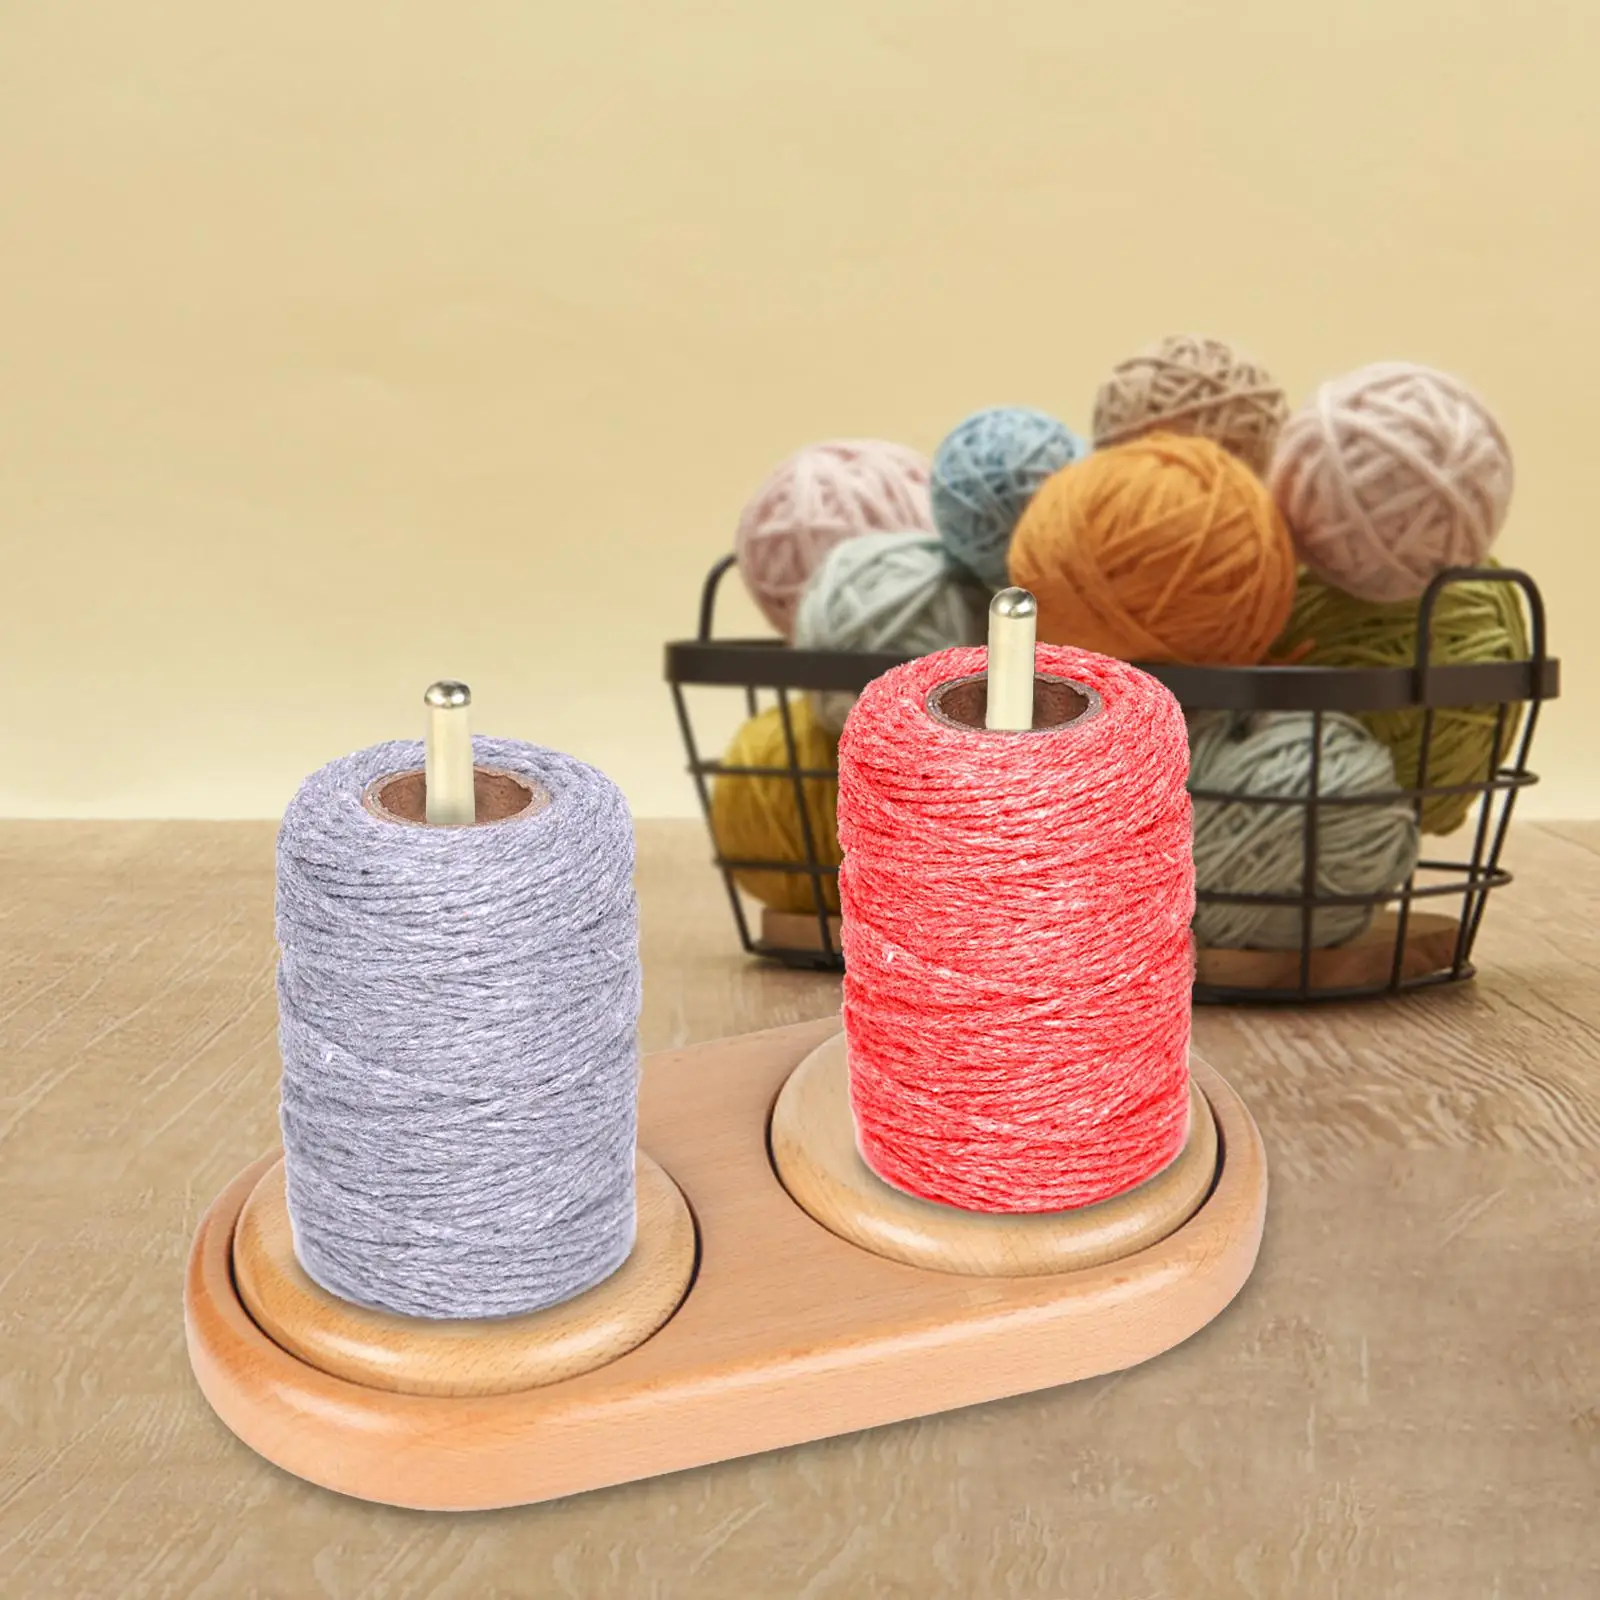 

Creative Yarn Holder Hold 2 yarns Prevent Thread Tangling Roll Paper Towel Holder Durable Yarn Dispenser for Wife